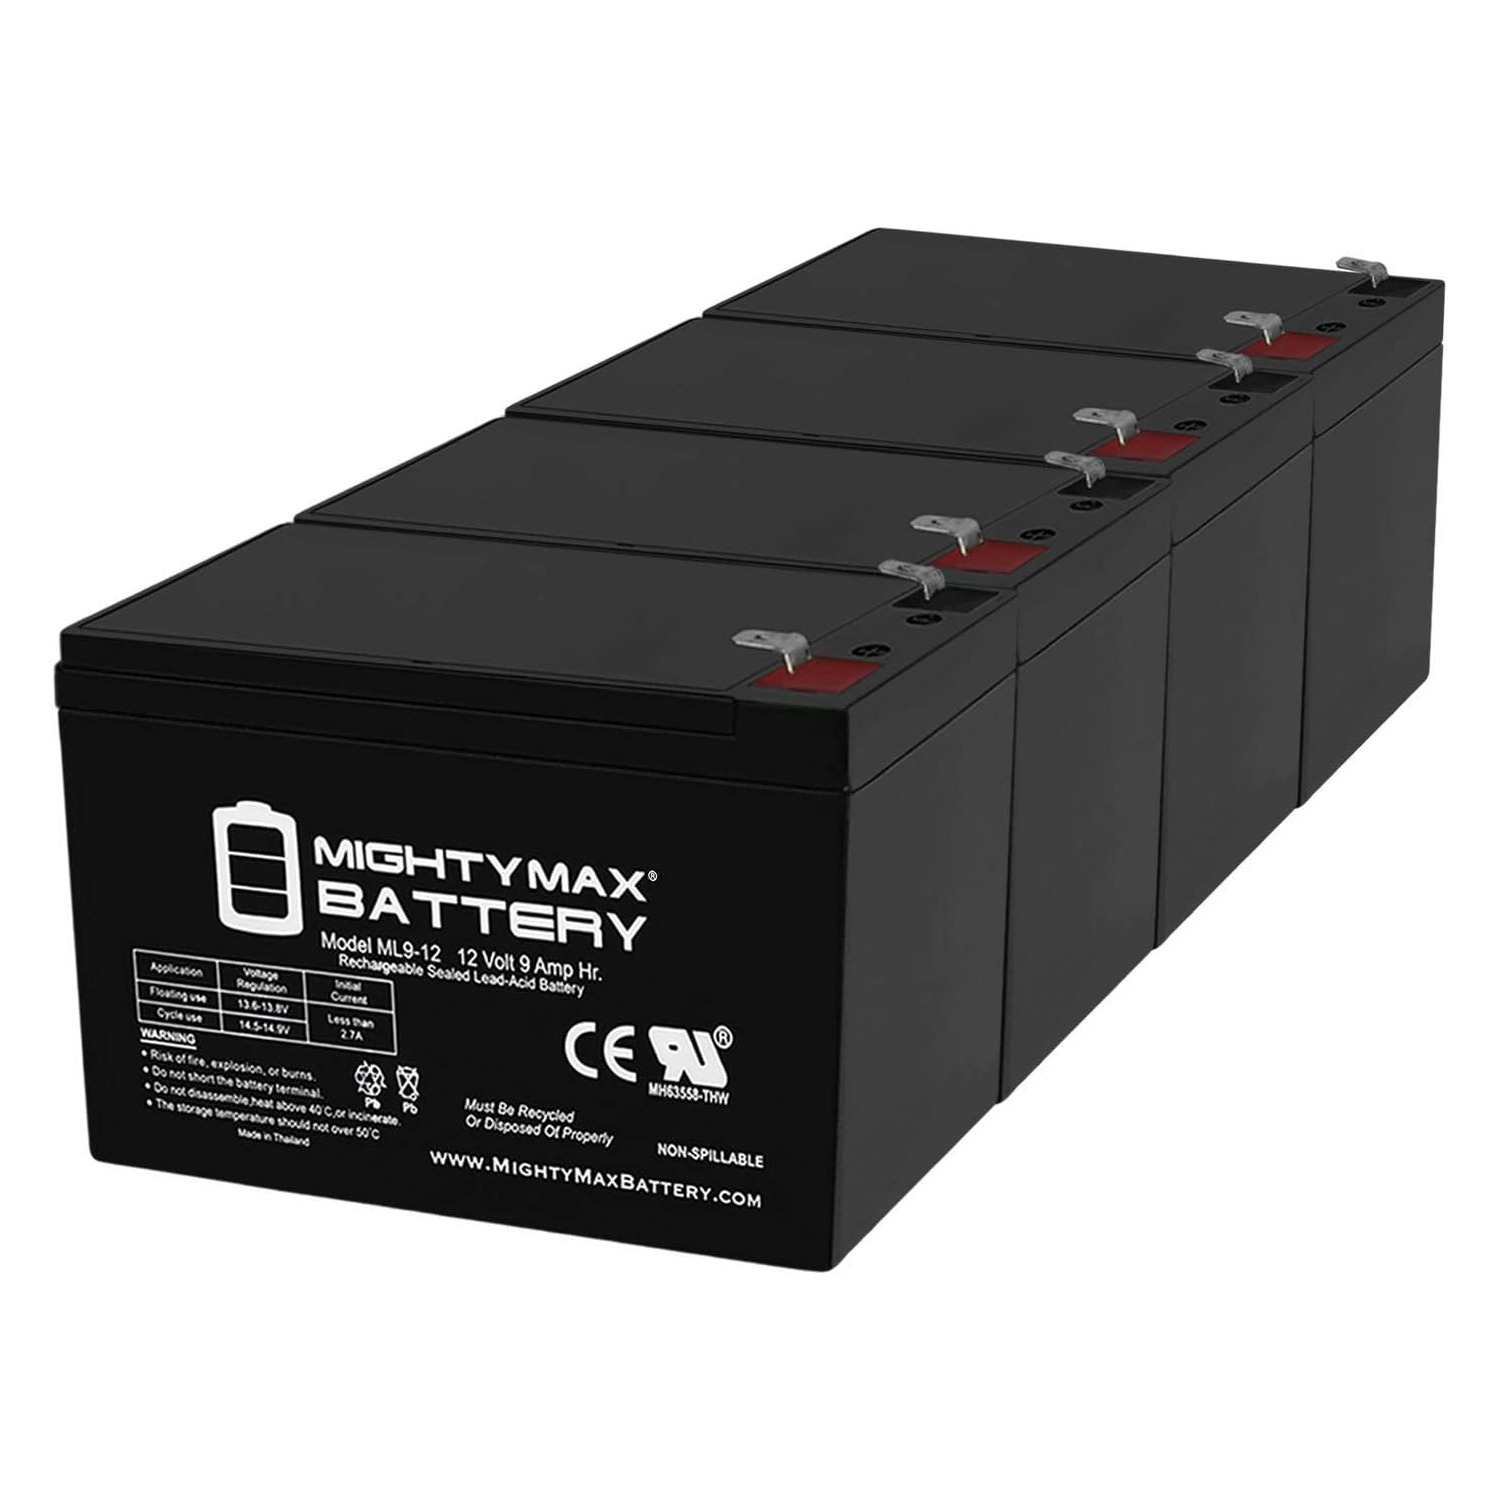 Altronix SMP5PMCTXPD4 12V, 9Ah Lead Acid Battery - 4 Pack